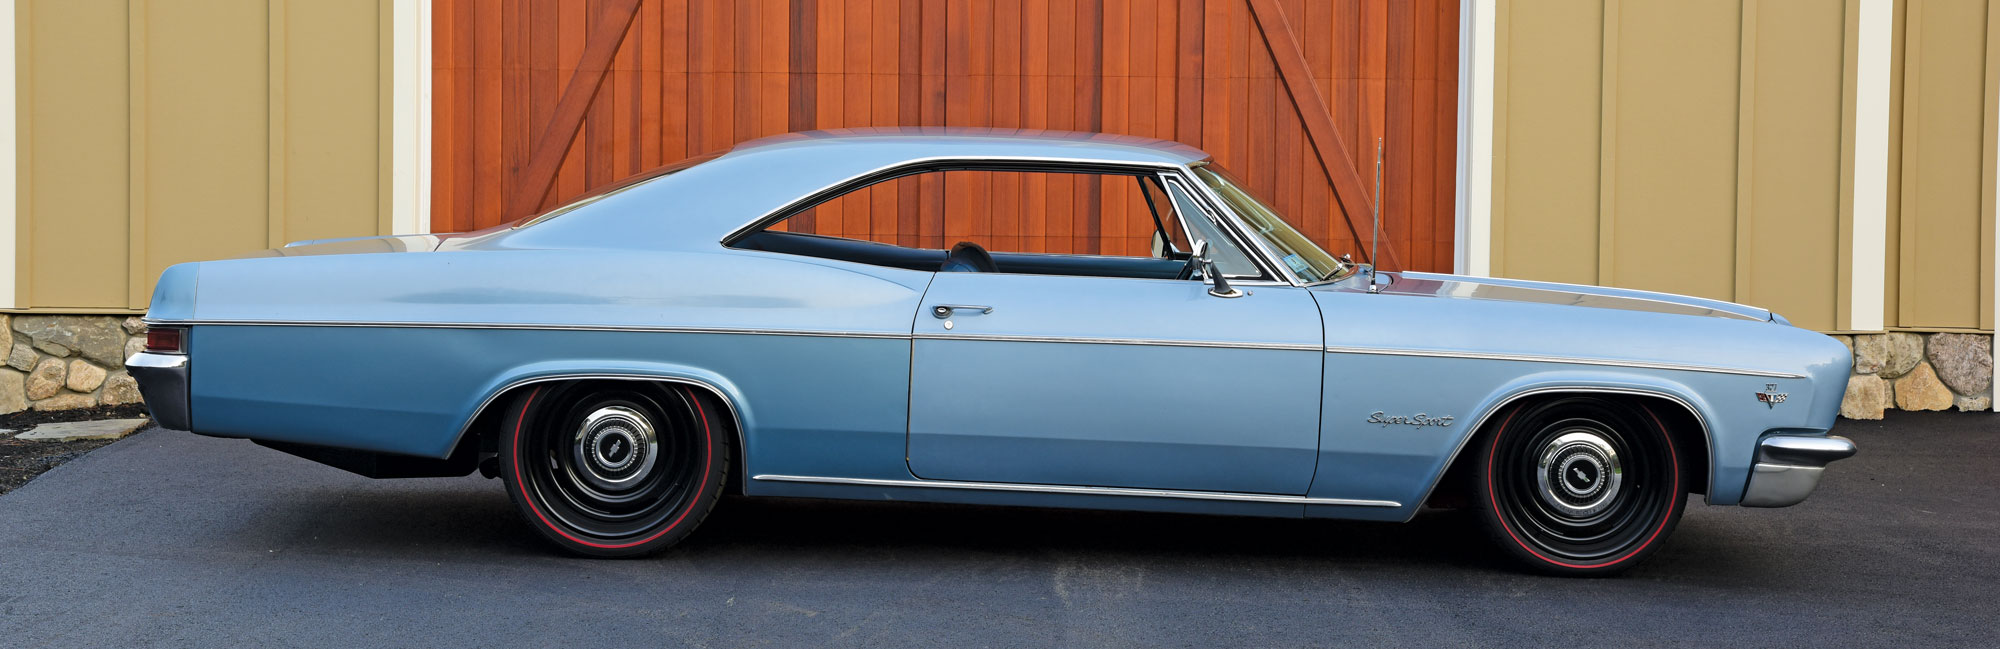 1966 Chevy Impala SS side view